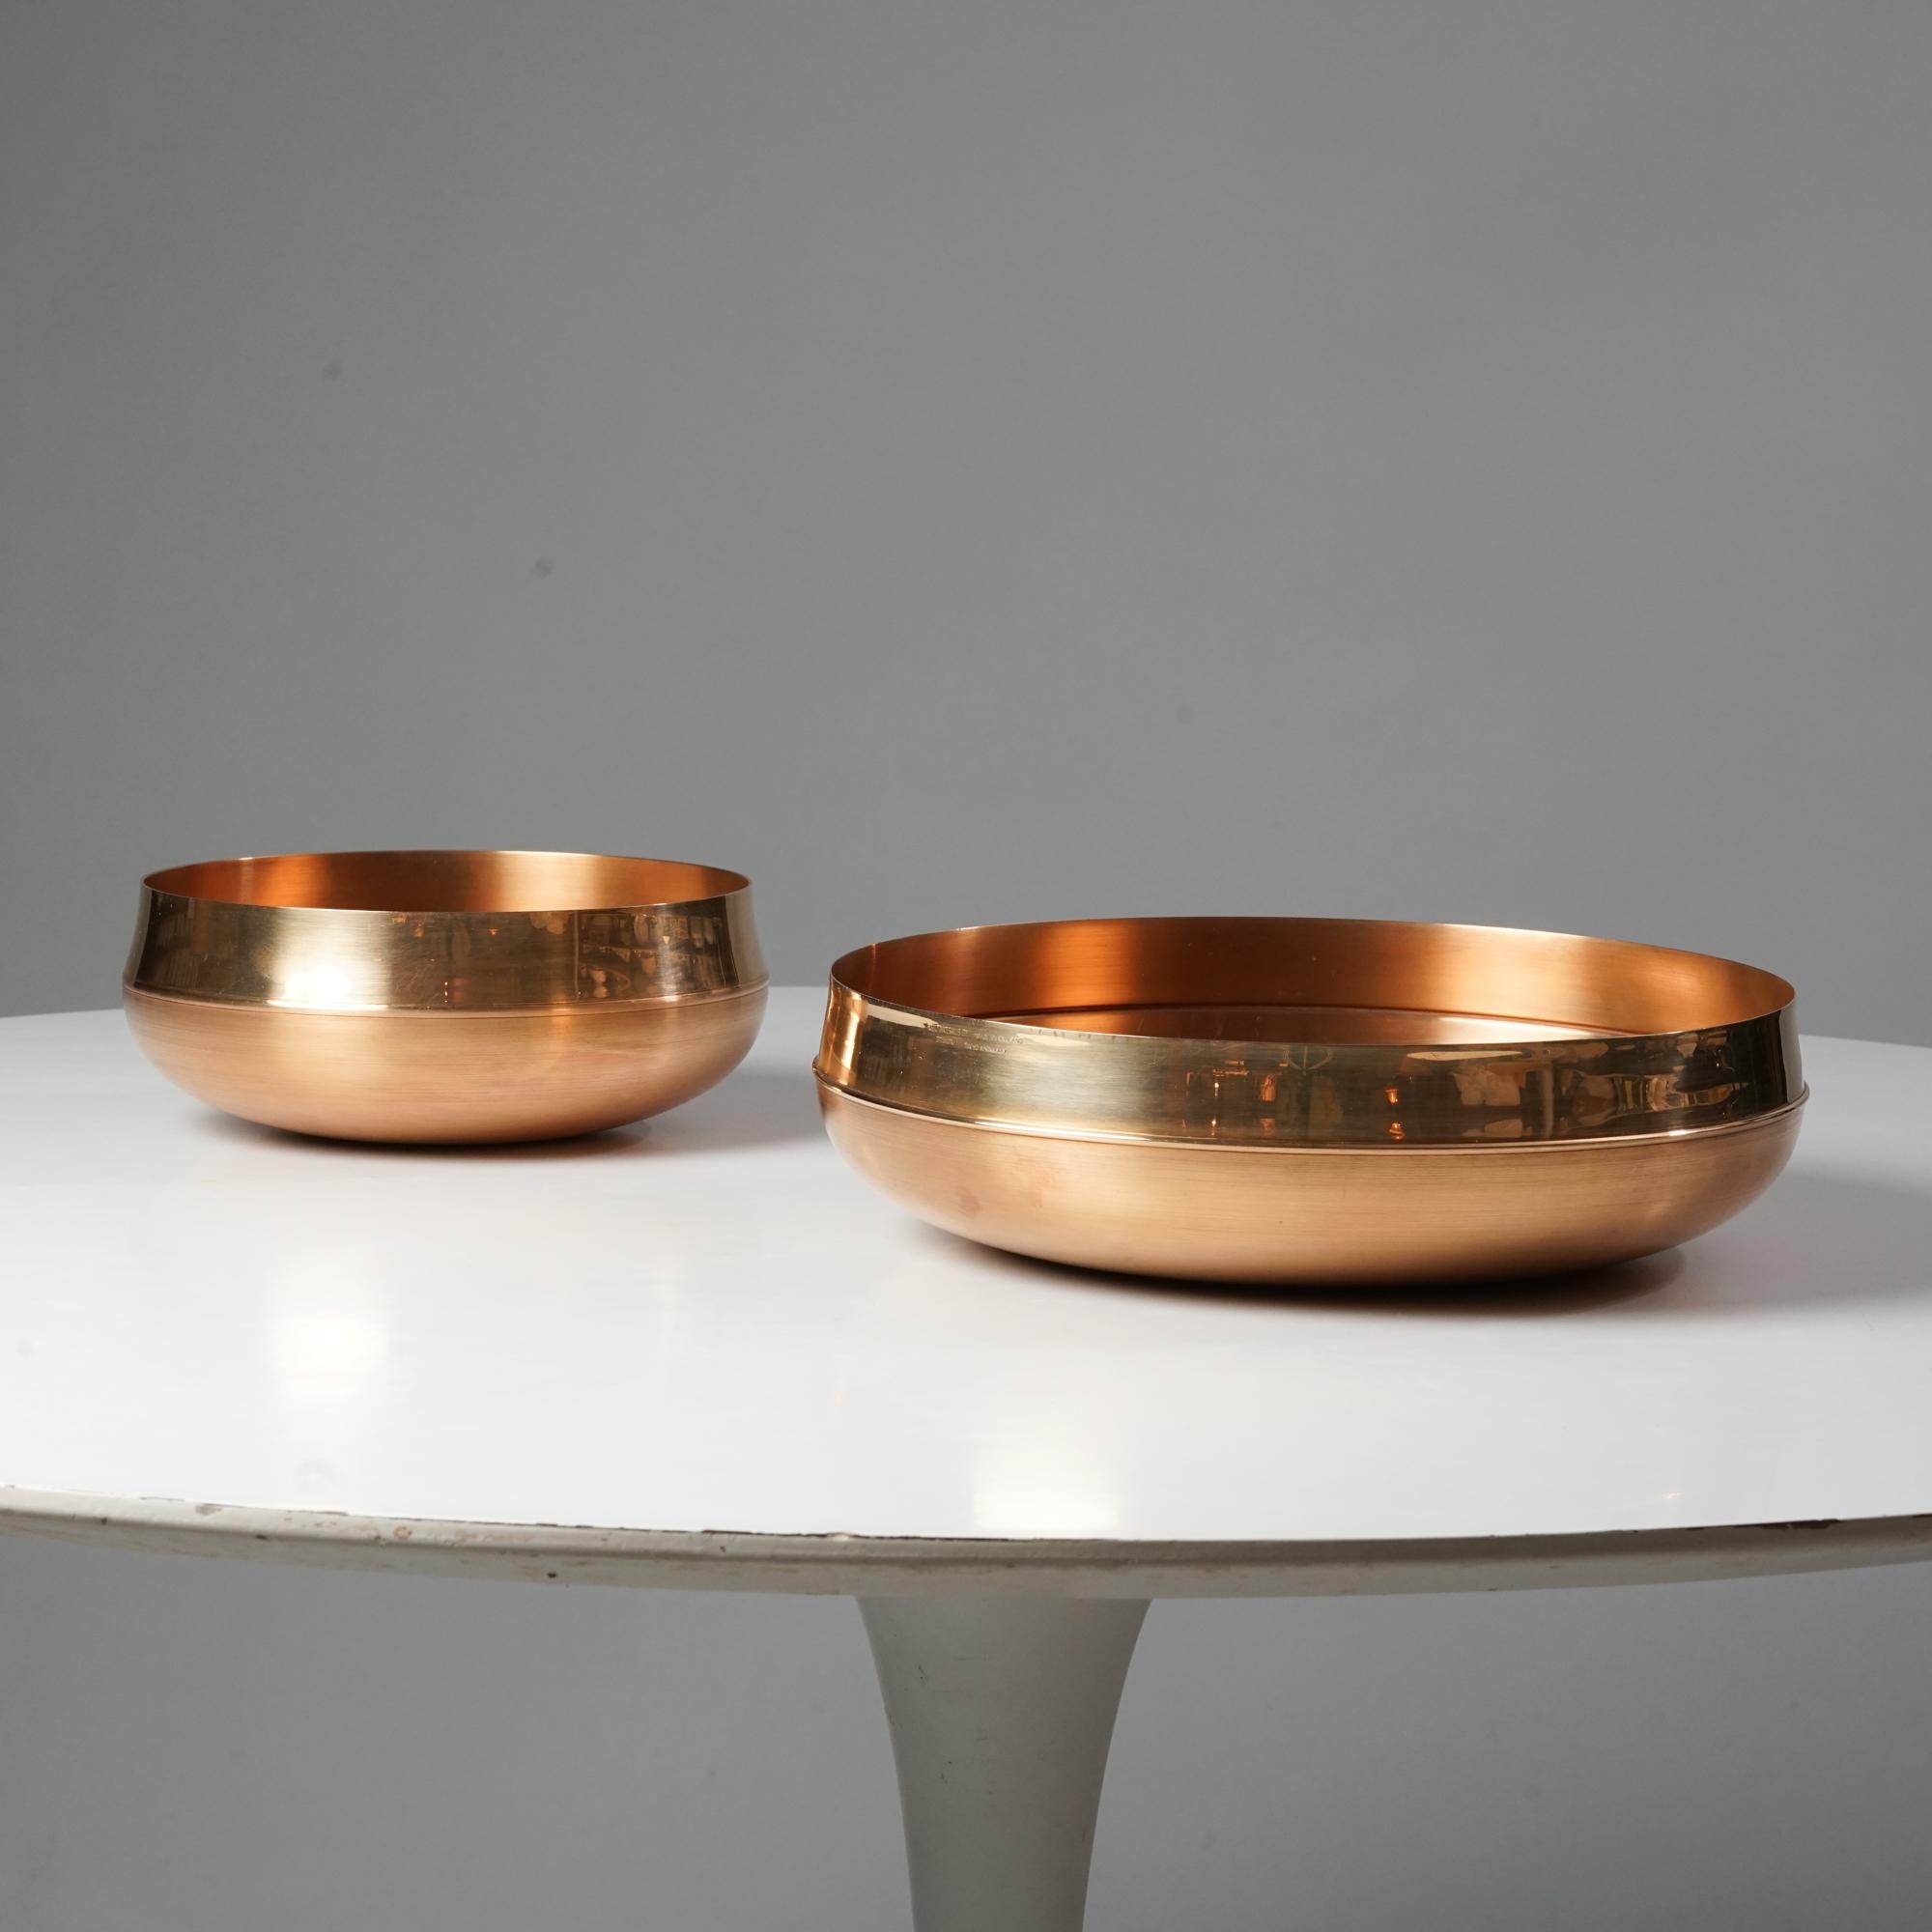 Bronze bowls model TW 446 & 448 designed by Tapio Wirkkala, manufactured by Kultakeskus Oy, 1970s. Marked. Good vintage condition, minor patina and wear consistent with age and use. The bolws are sold as a set. 